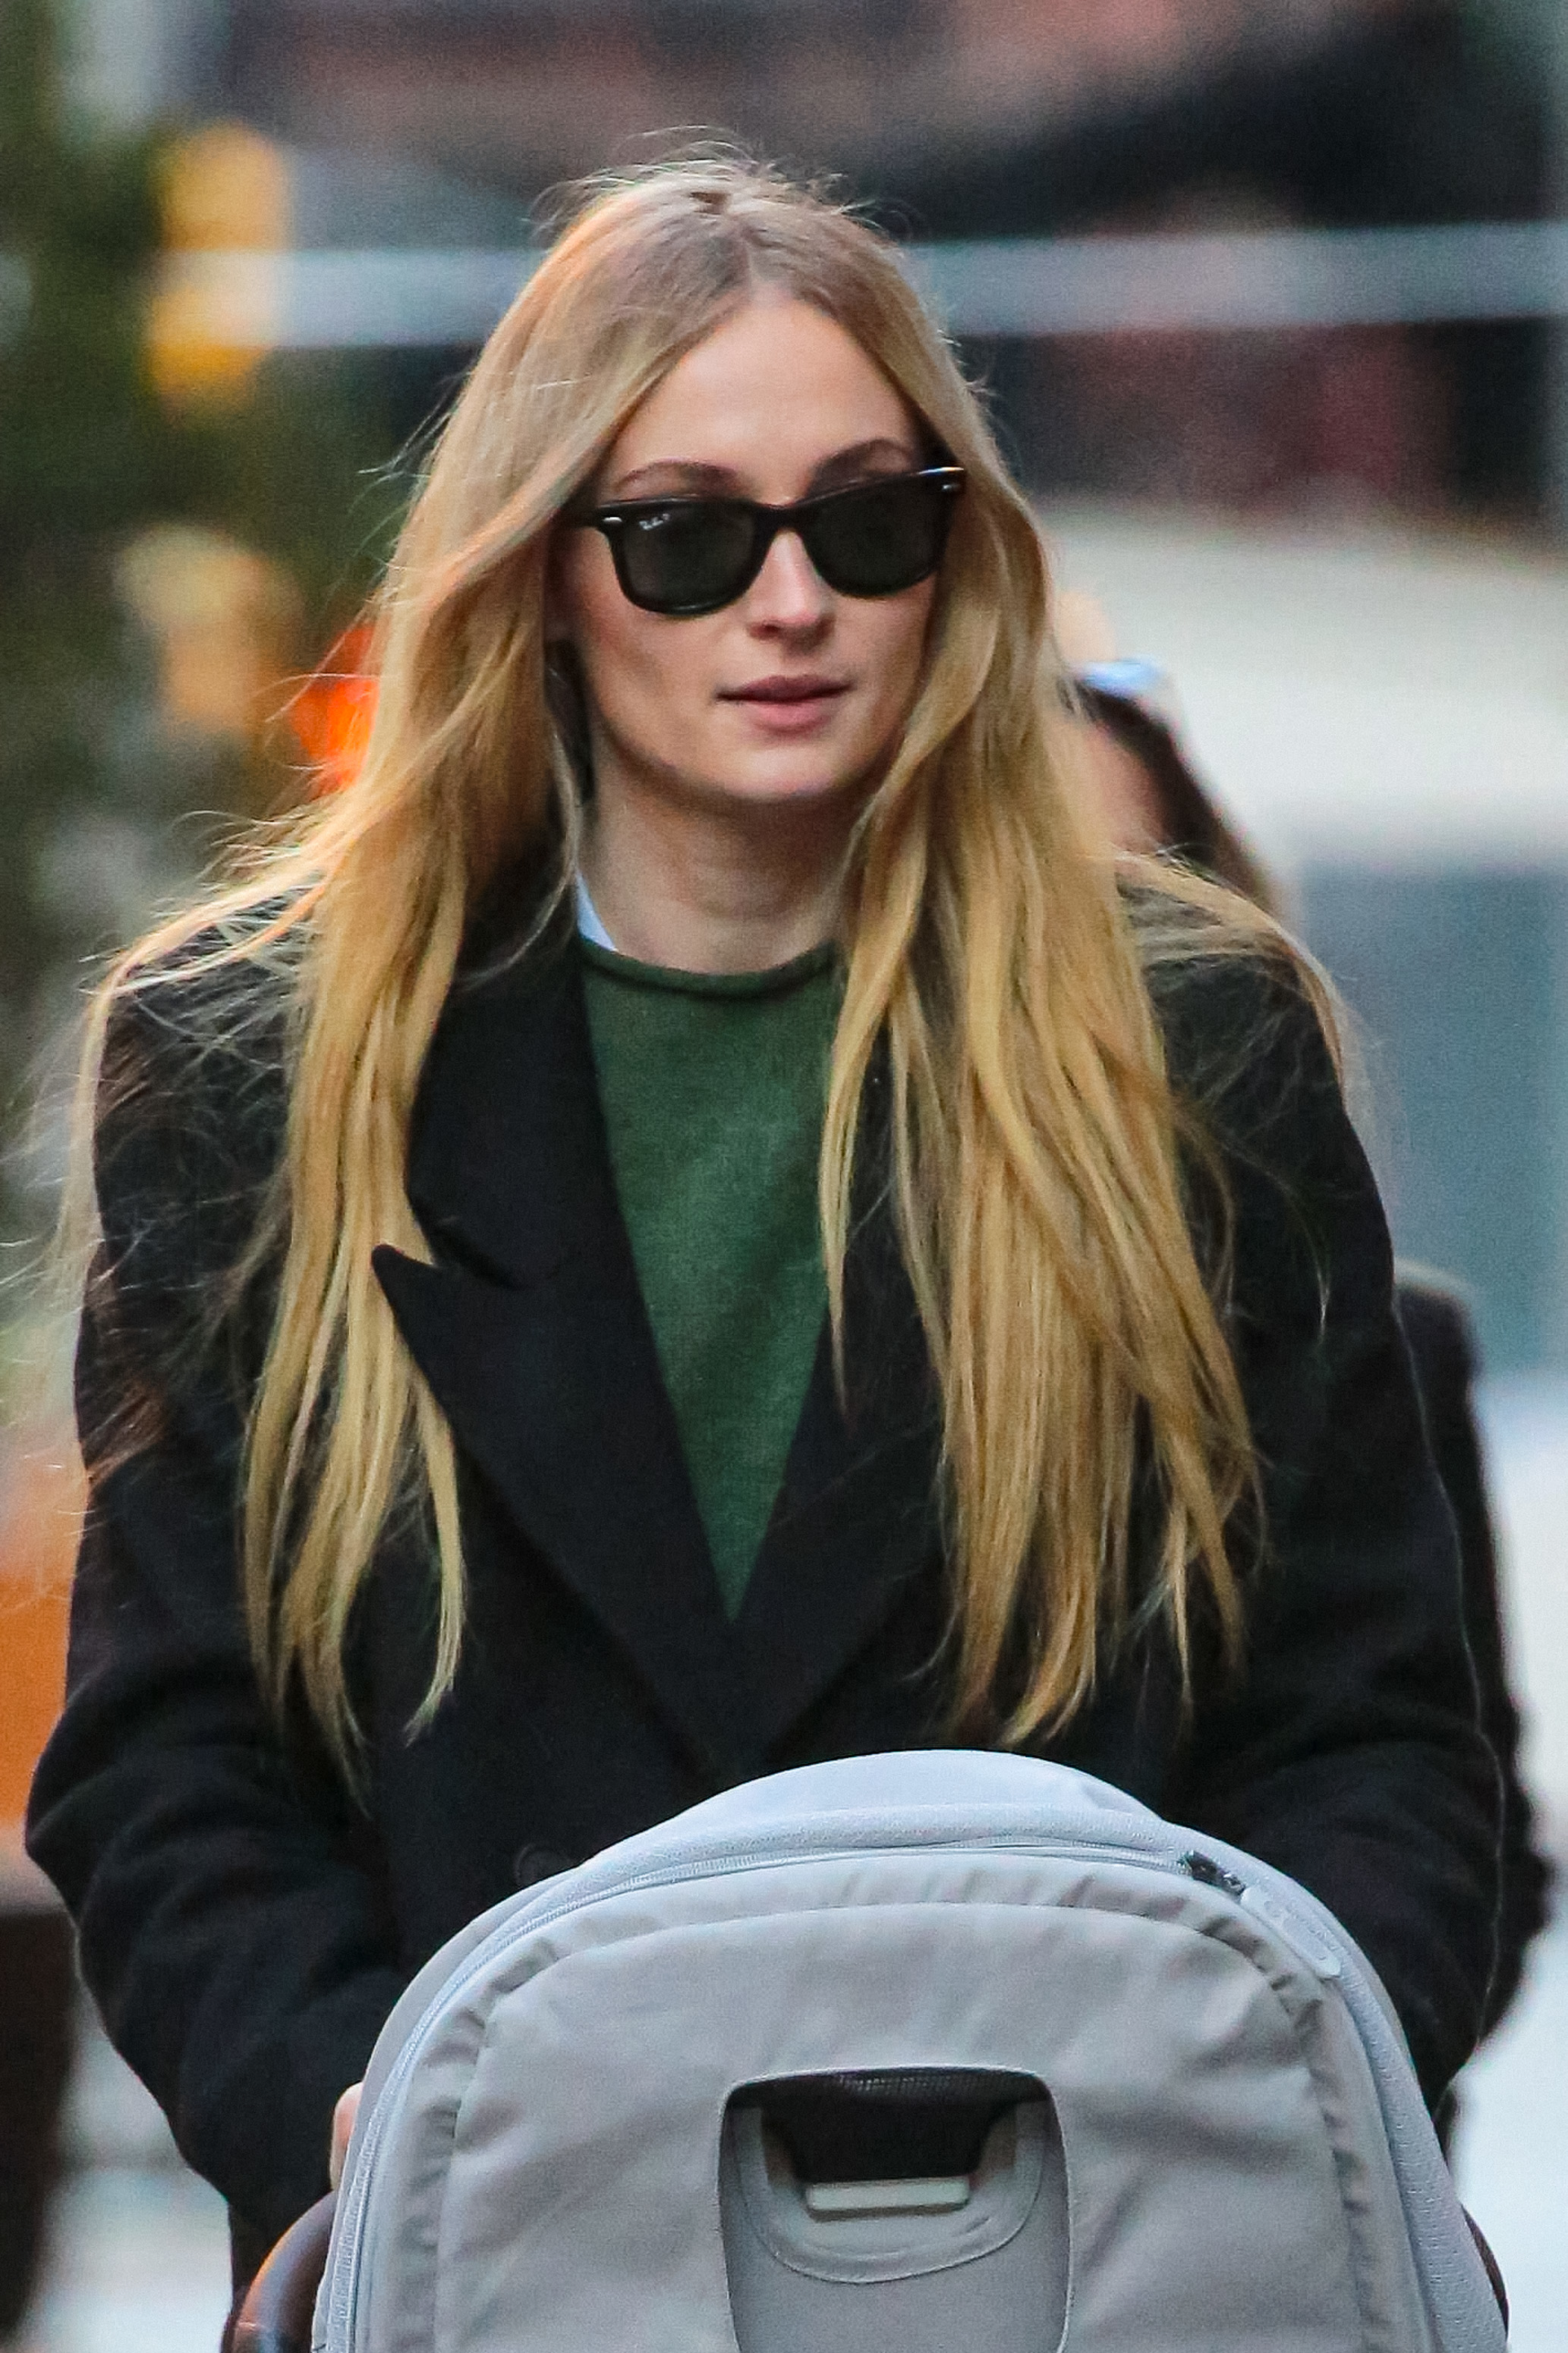 Sophie Turner in sunglasses and a long coat pushing a stroller